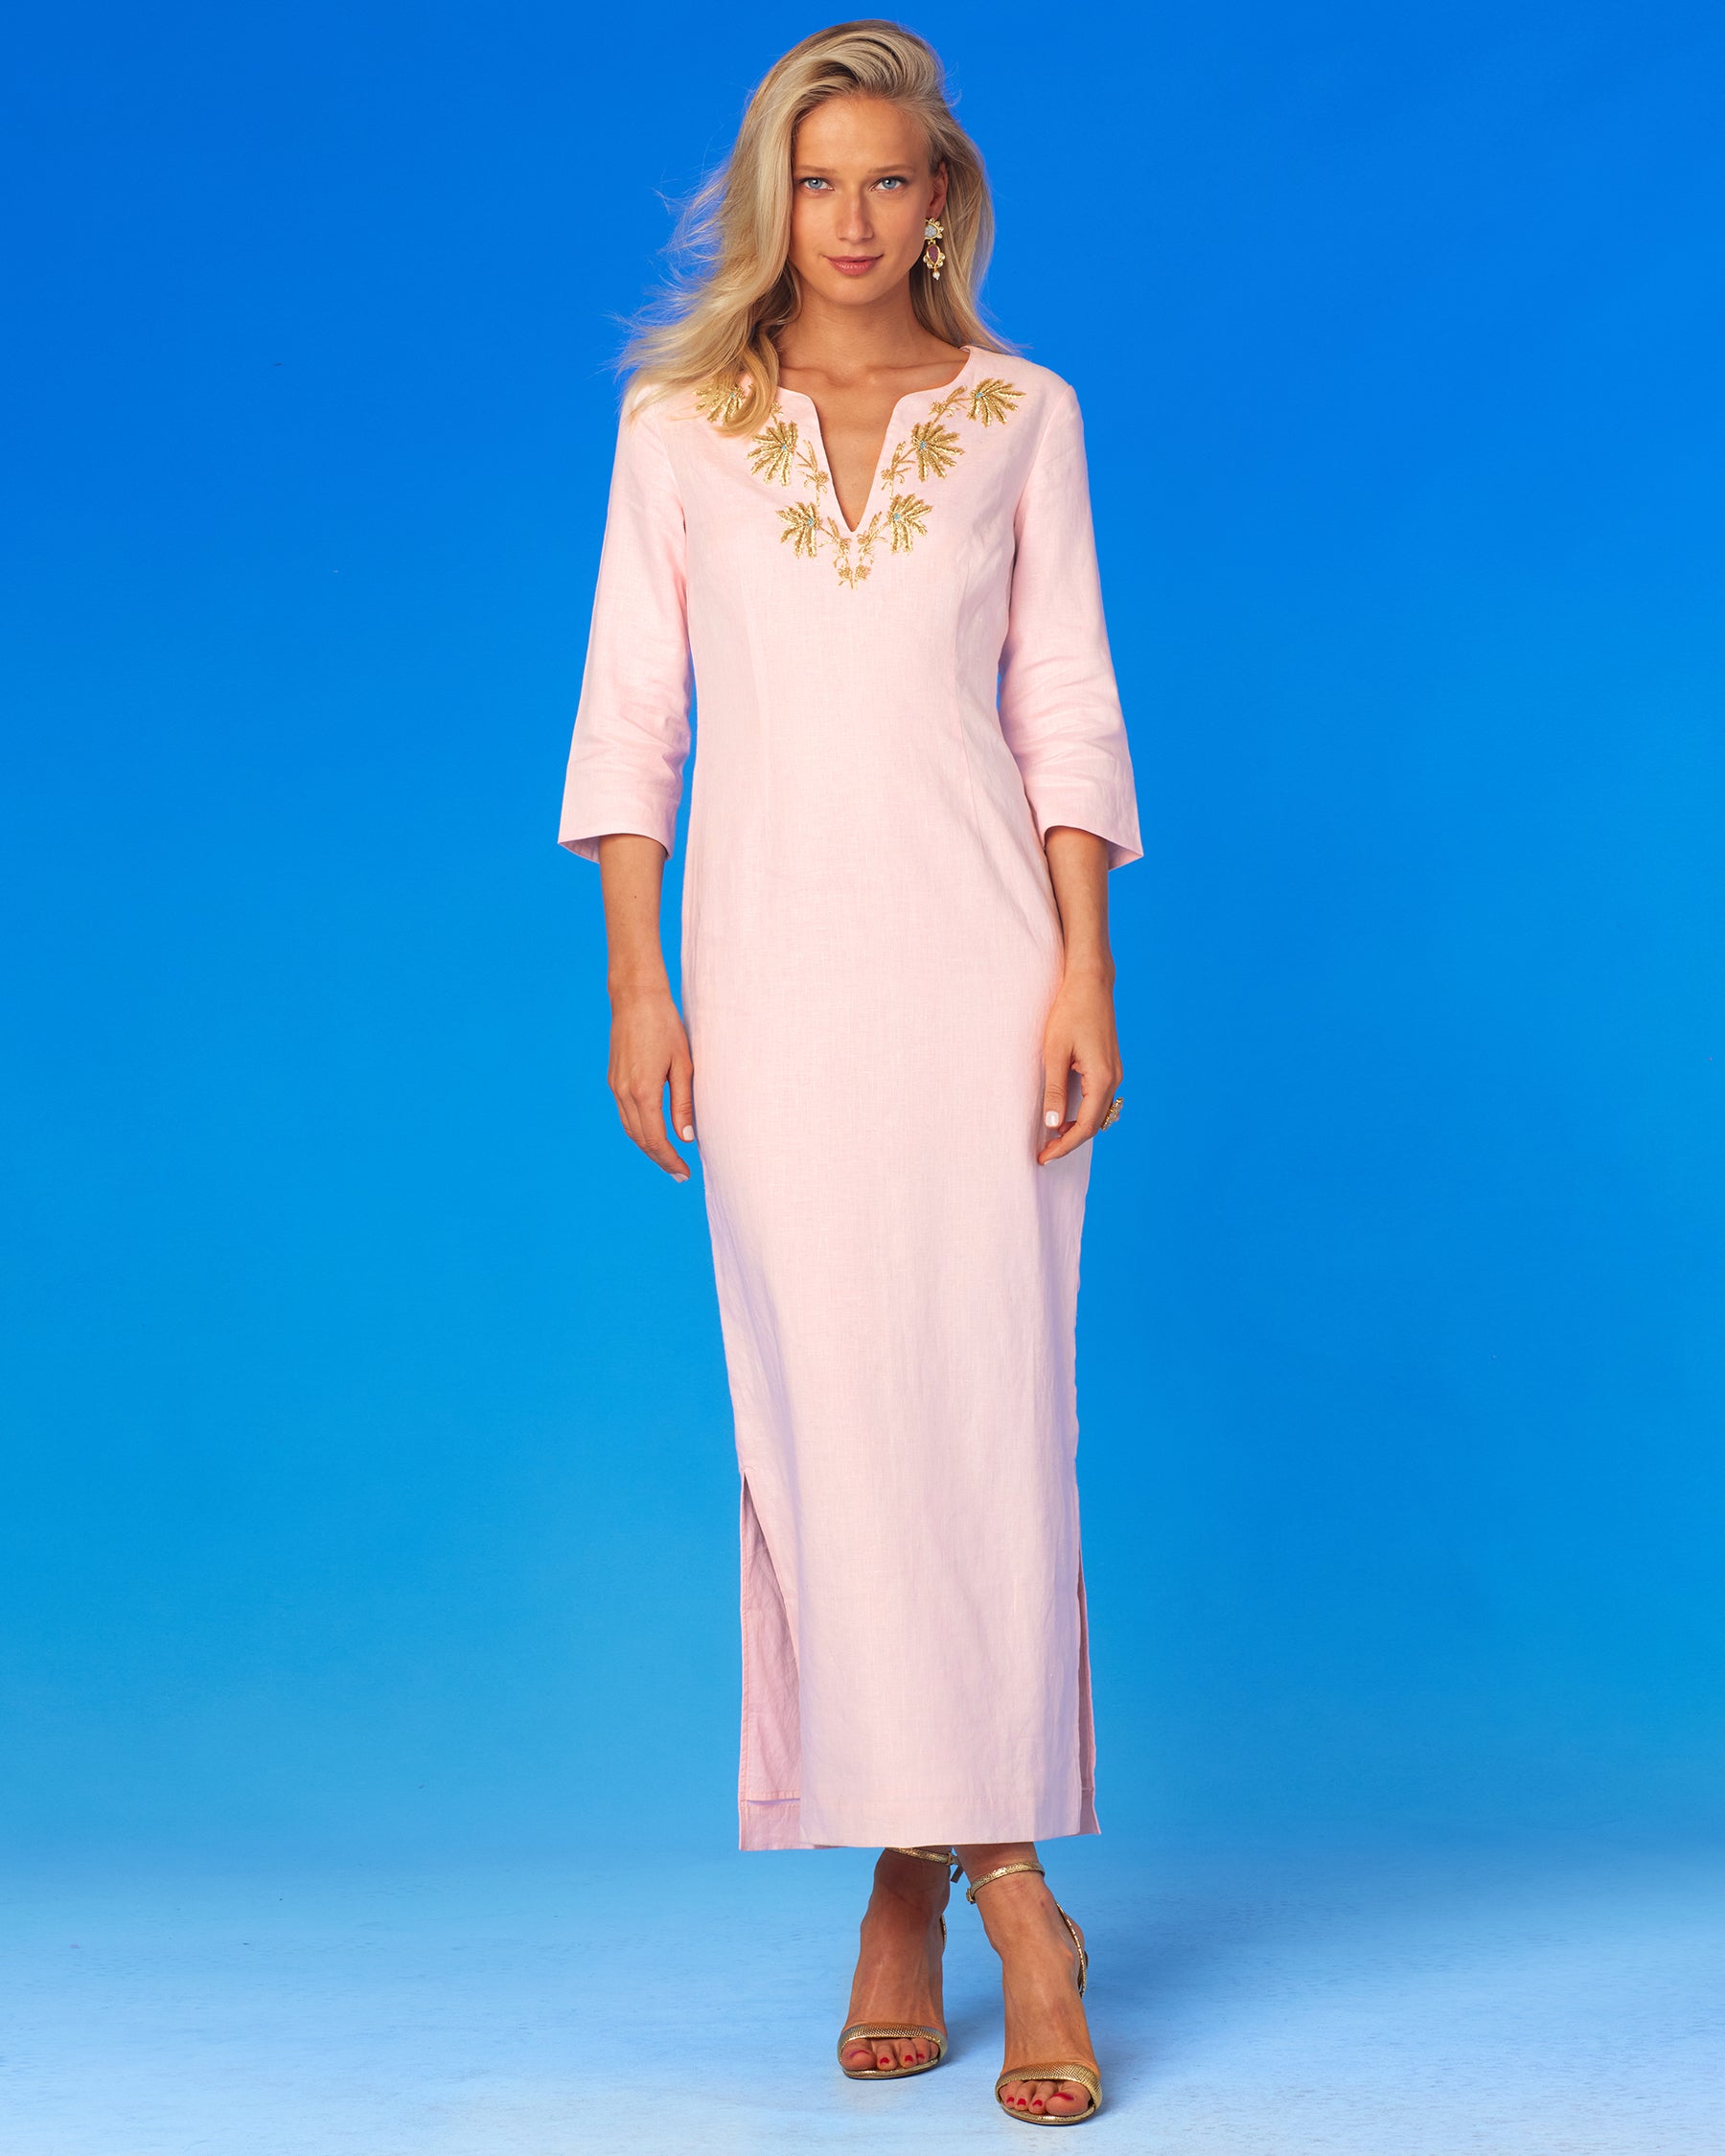 Palmira Long Dress in Blush Pink Linen and Gold Embellishment-Frull front view without sash belt